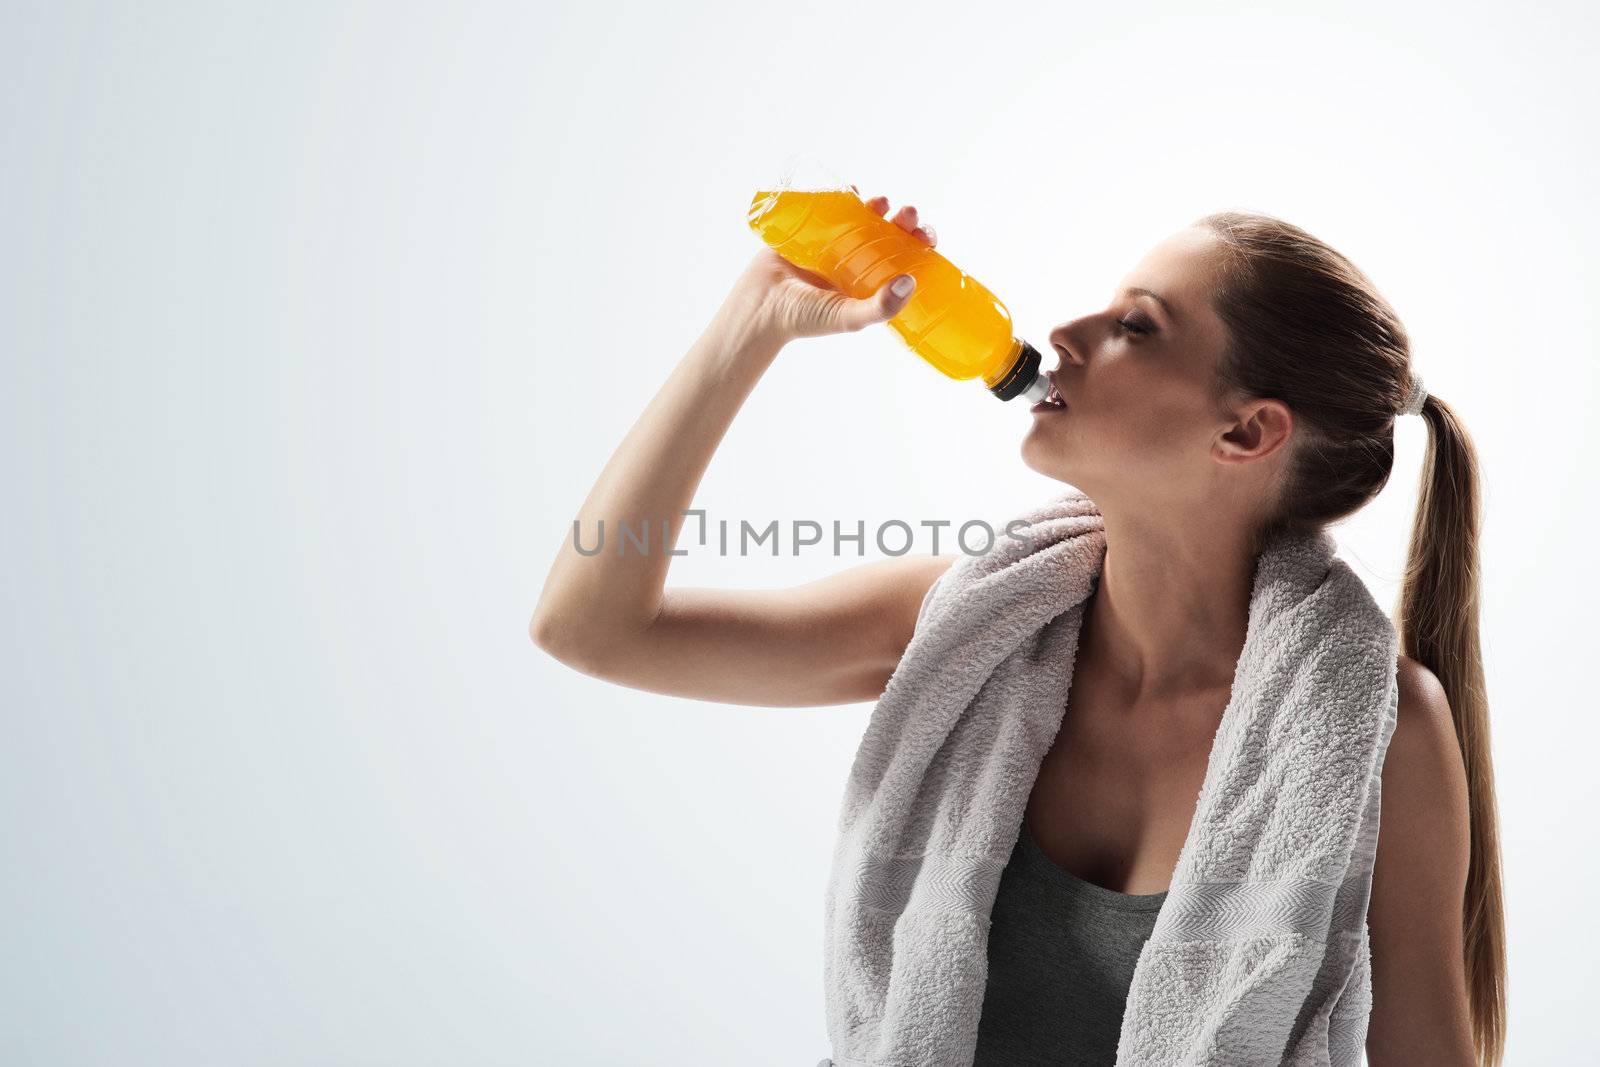 Thirsty young woman drinking after fitness workout

